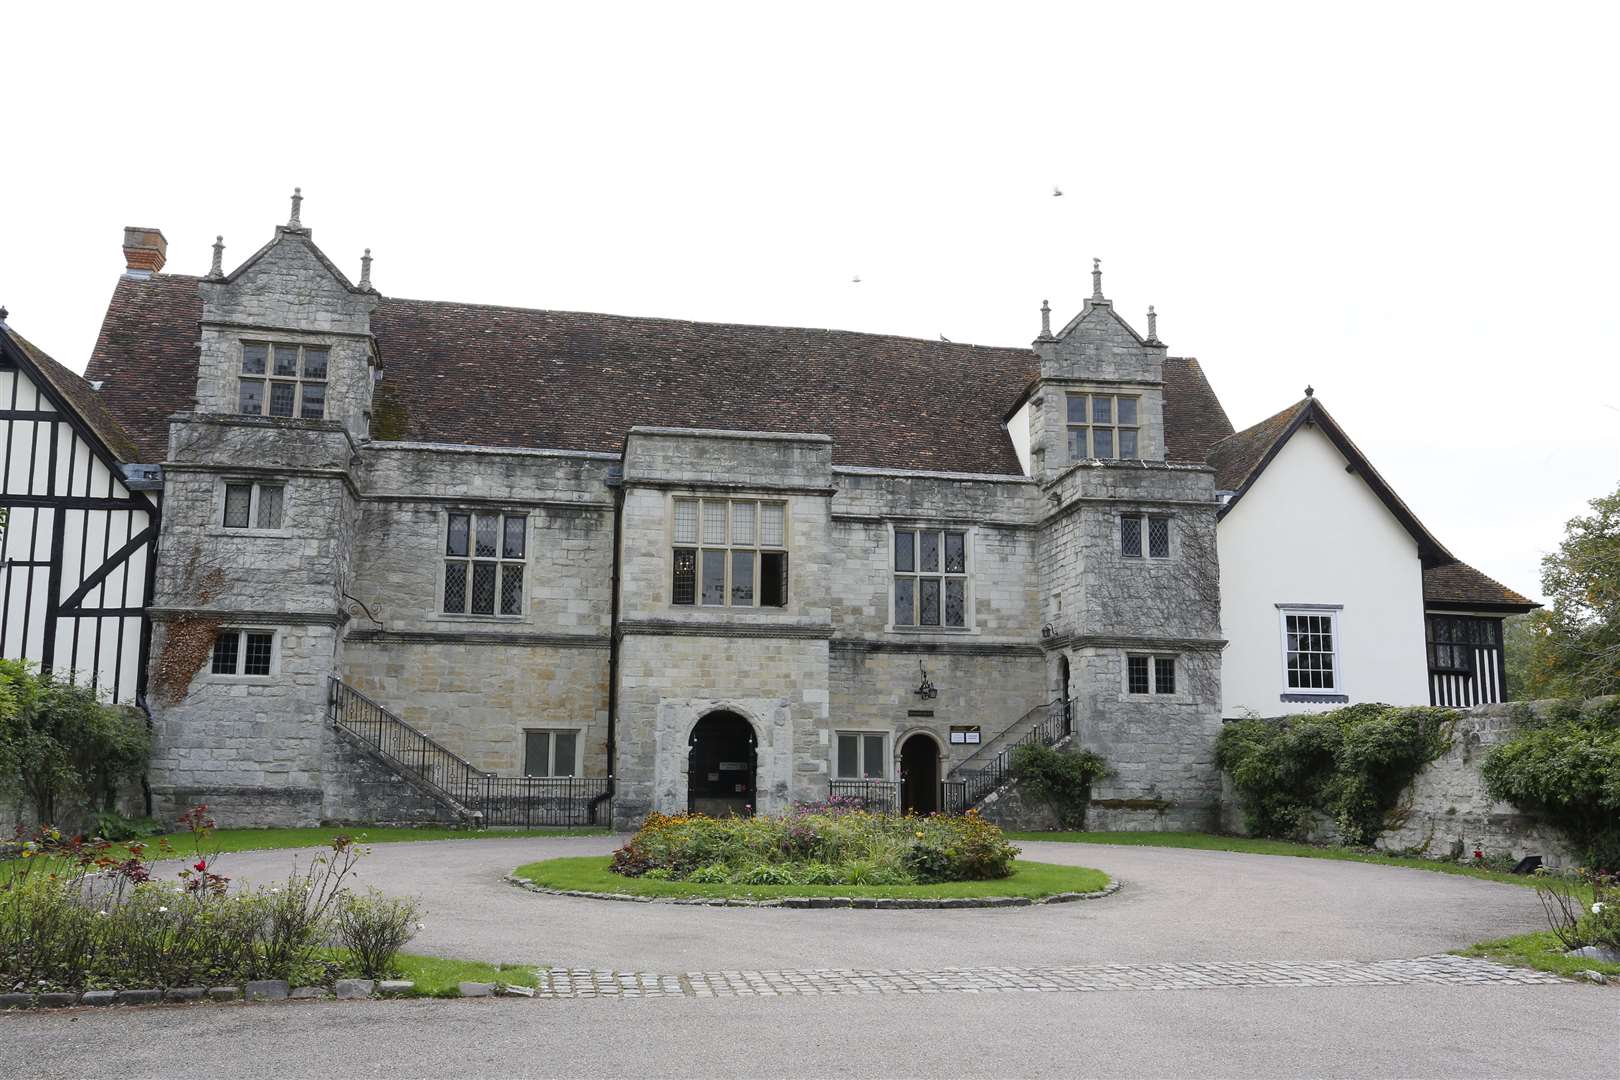 Archbishop's Palace in Maidstone